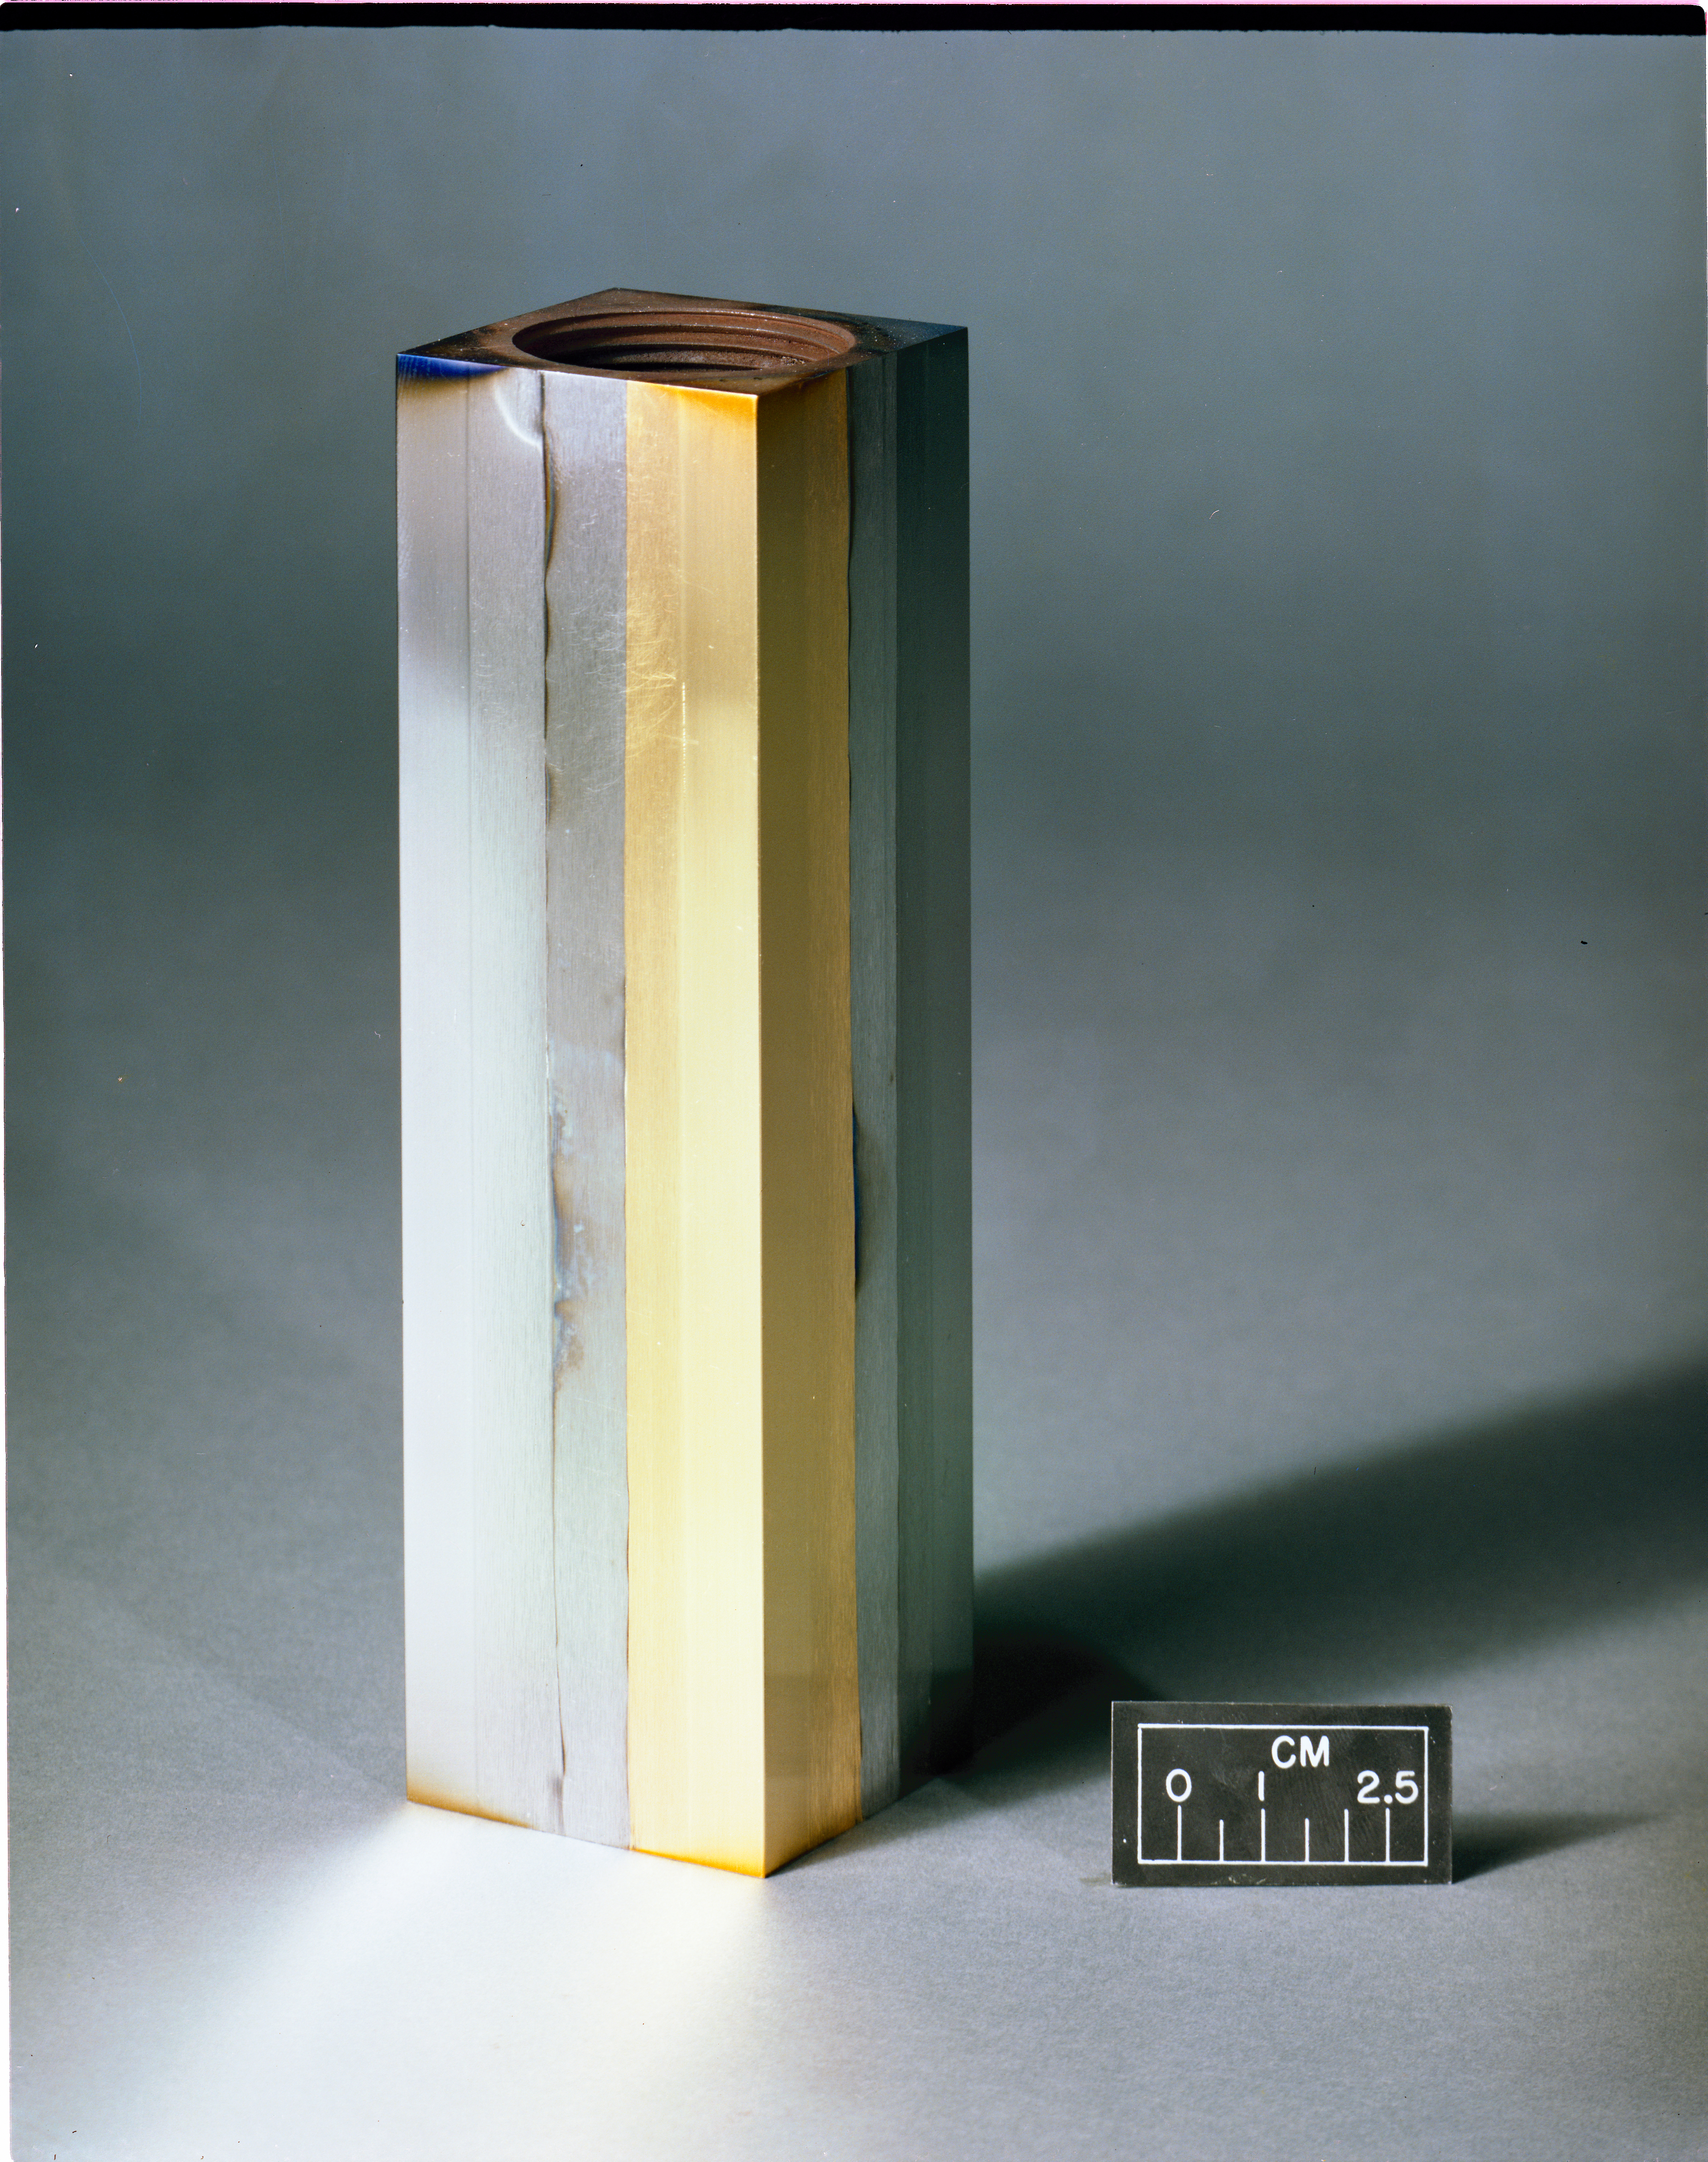 GOLD_COATED_STAINLESS_STEEL_BLOCK_-_NARA_-_17474918